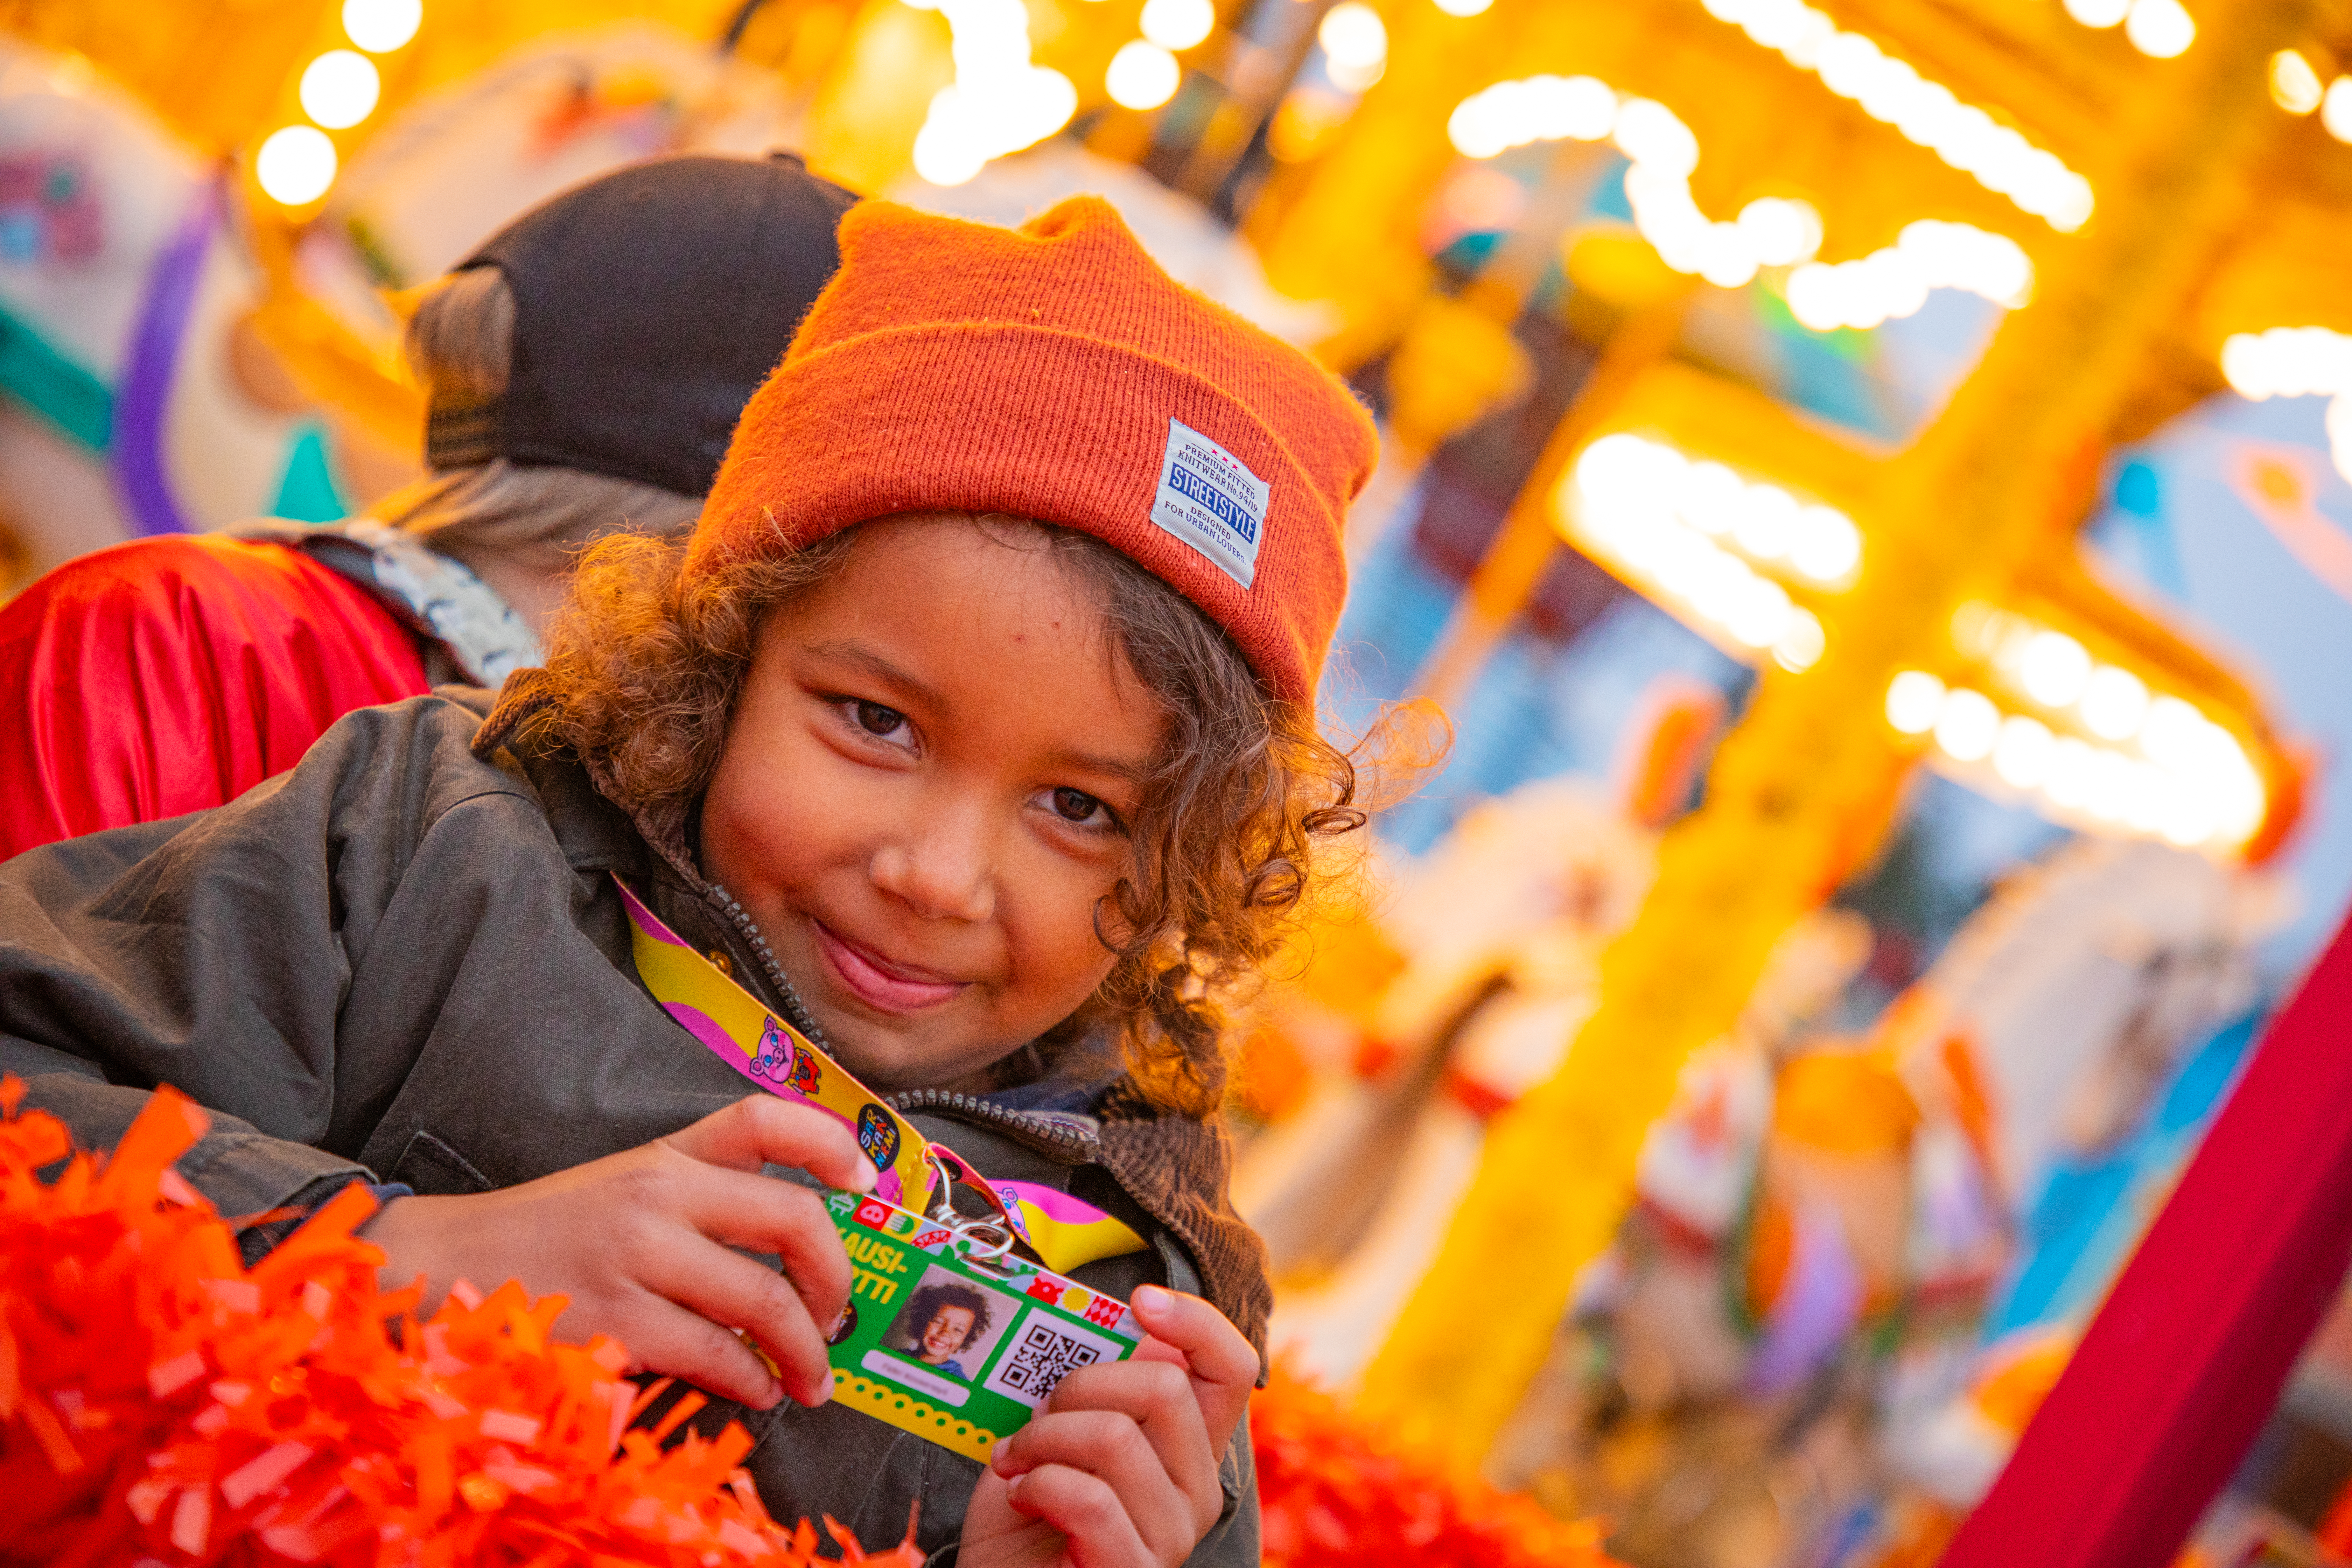 A brown, curly-haired child with an orange hat on their head happily holds the 2024 Season Pass in front of the Särkänniemi Candy Carousel in warm lighting.